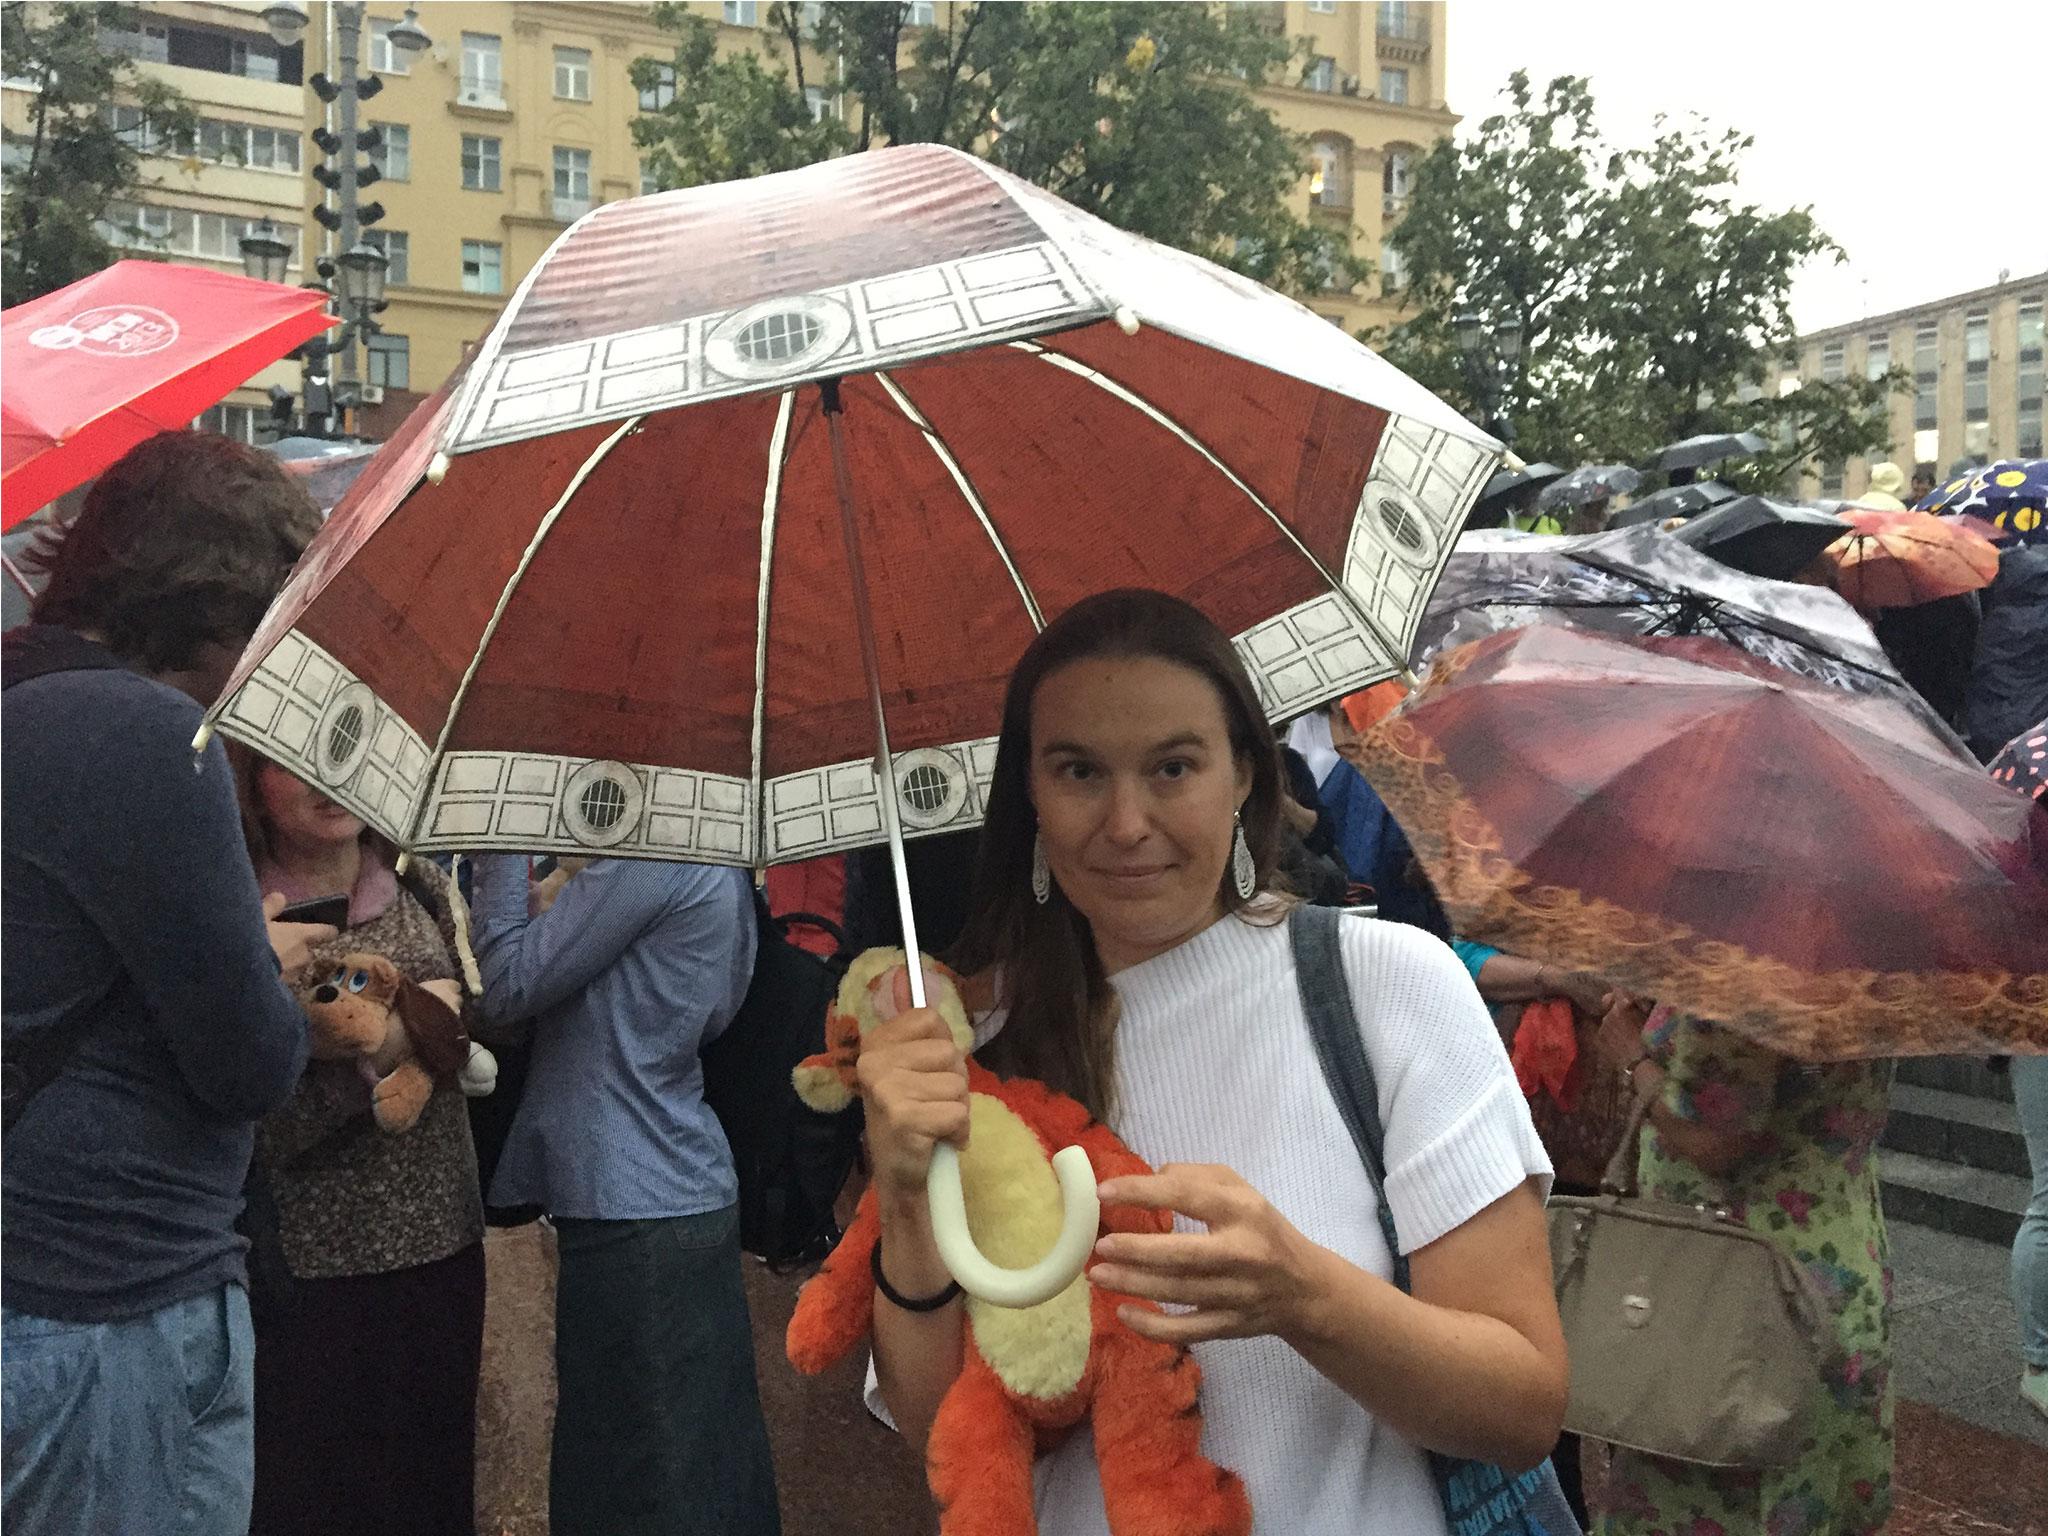 Yekaterina Milanovskaya was one of those who attended the rally